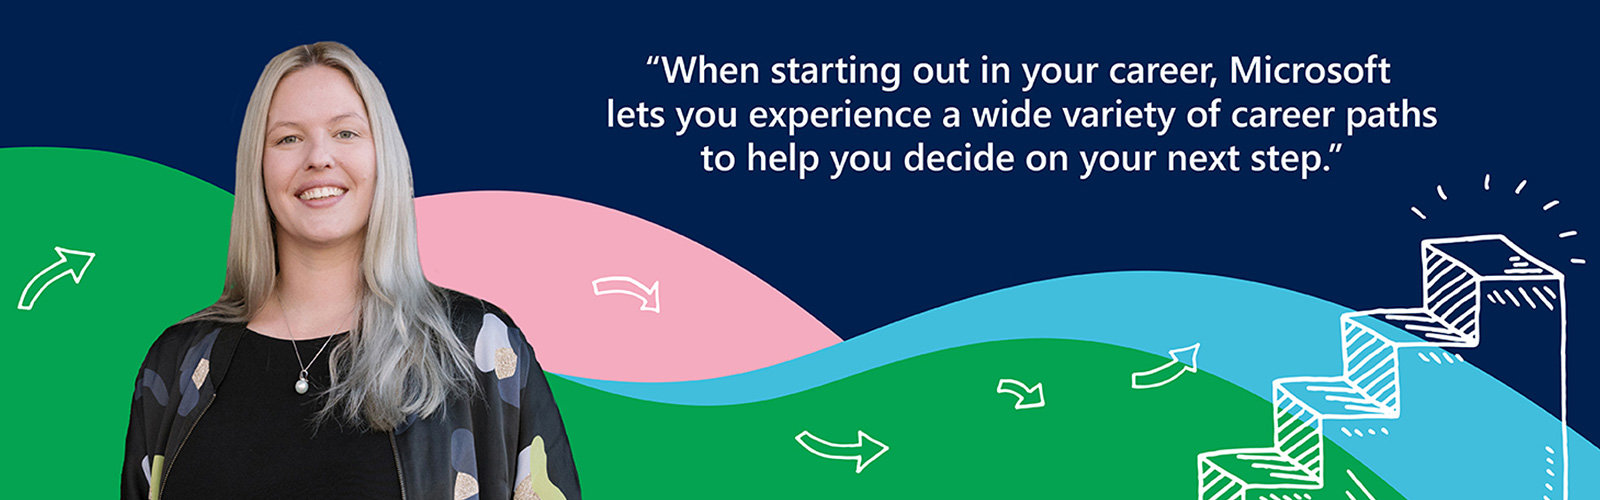 Angela embedded onto a colourful background with text reading, 'When starting out in your career, Microsoft lets you experience a wide variety of career paths to help you decide on your next step.'